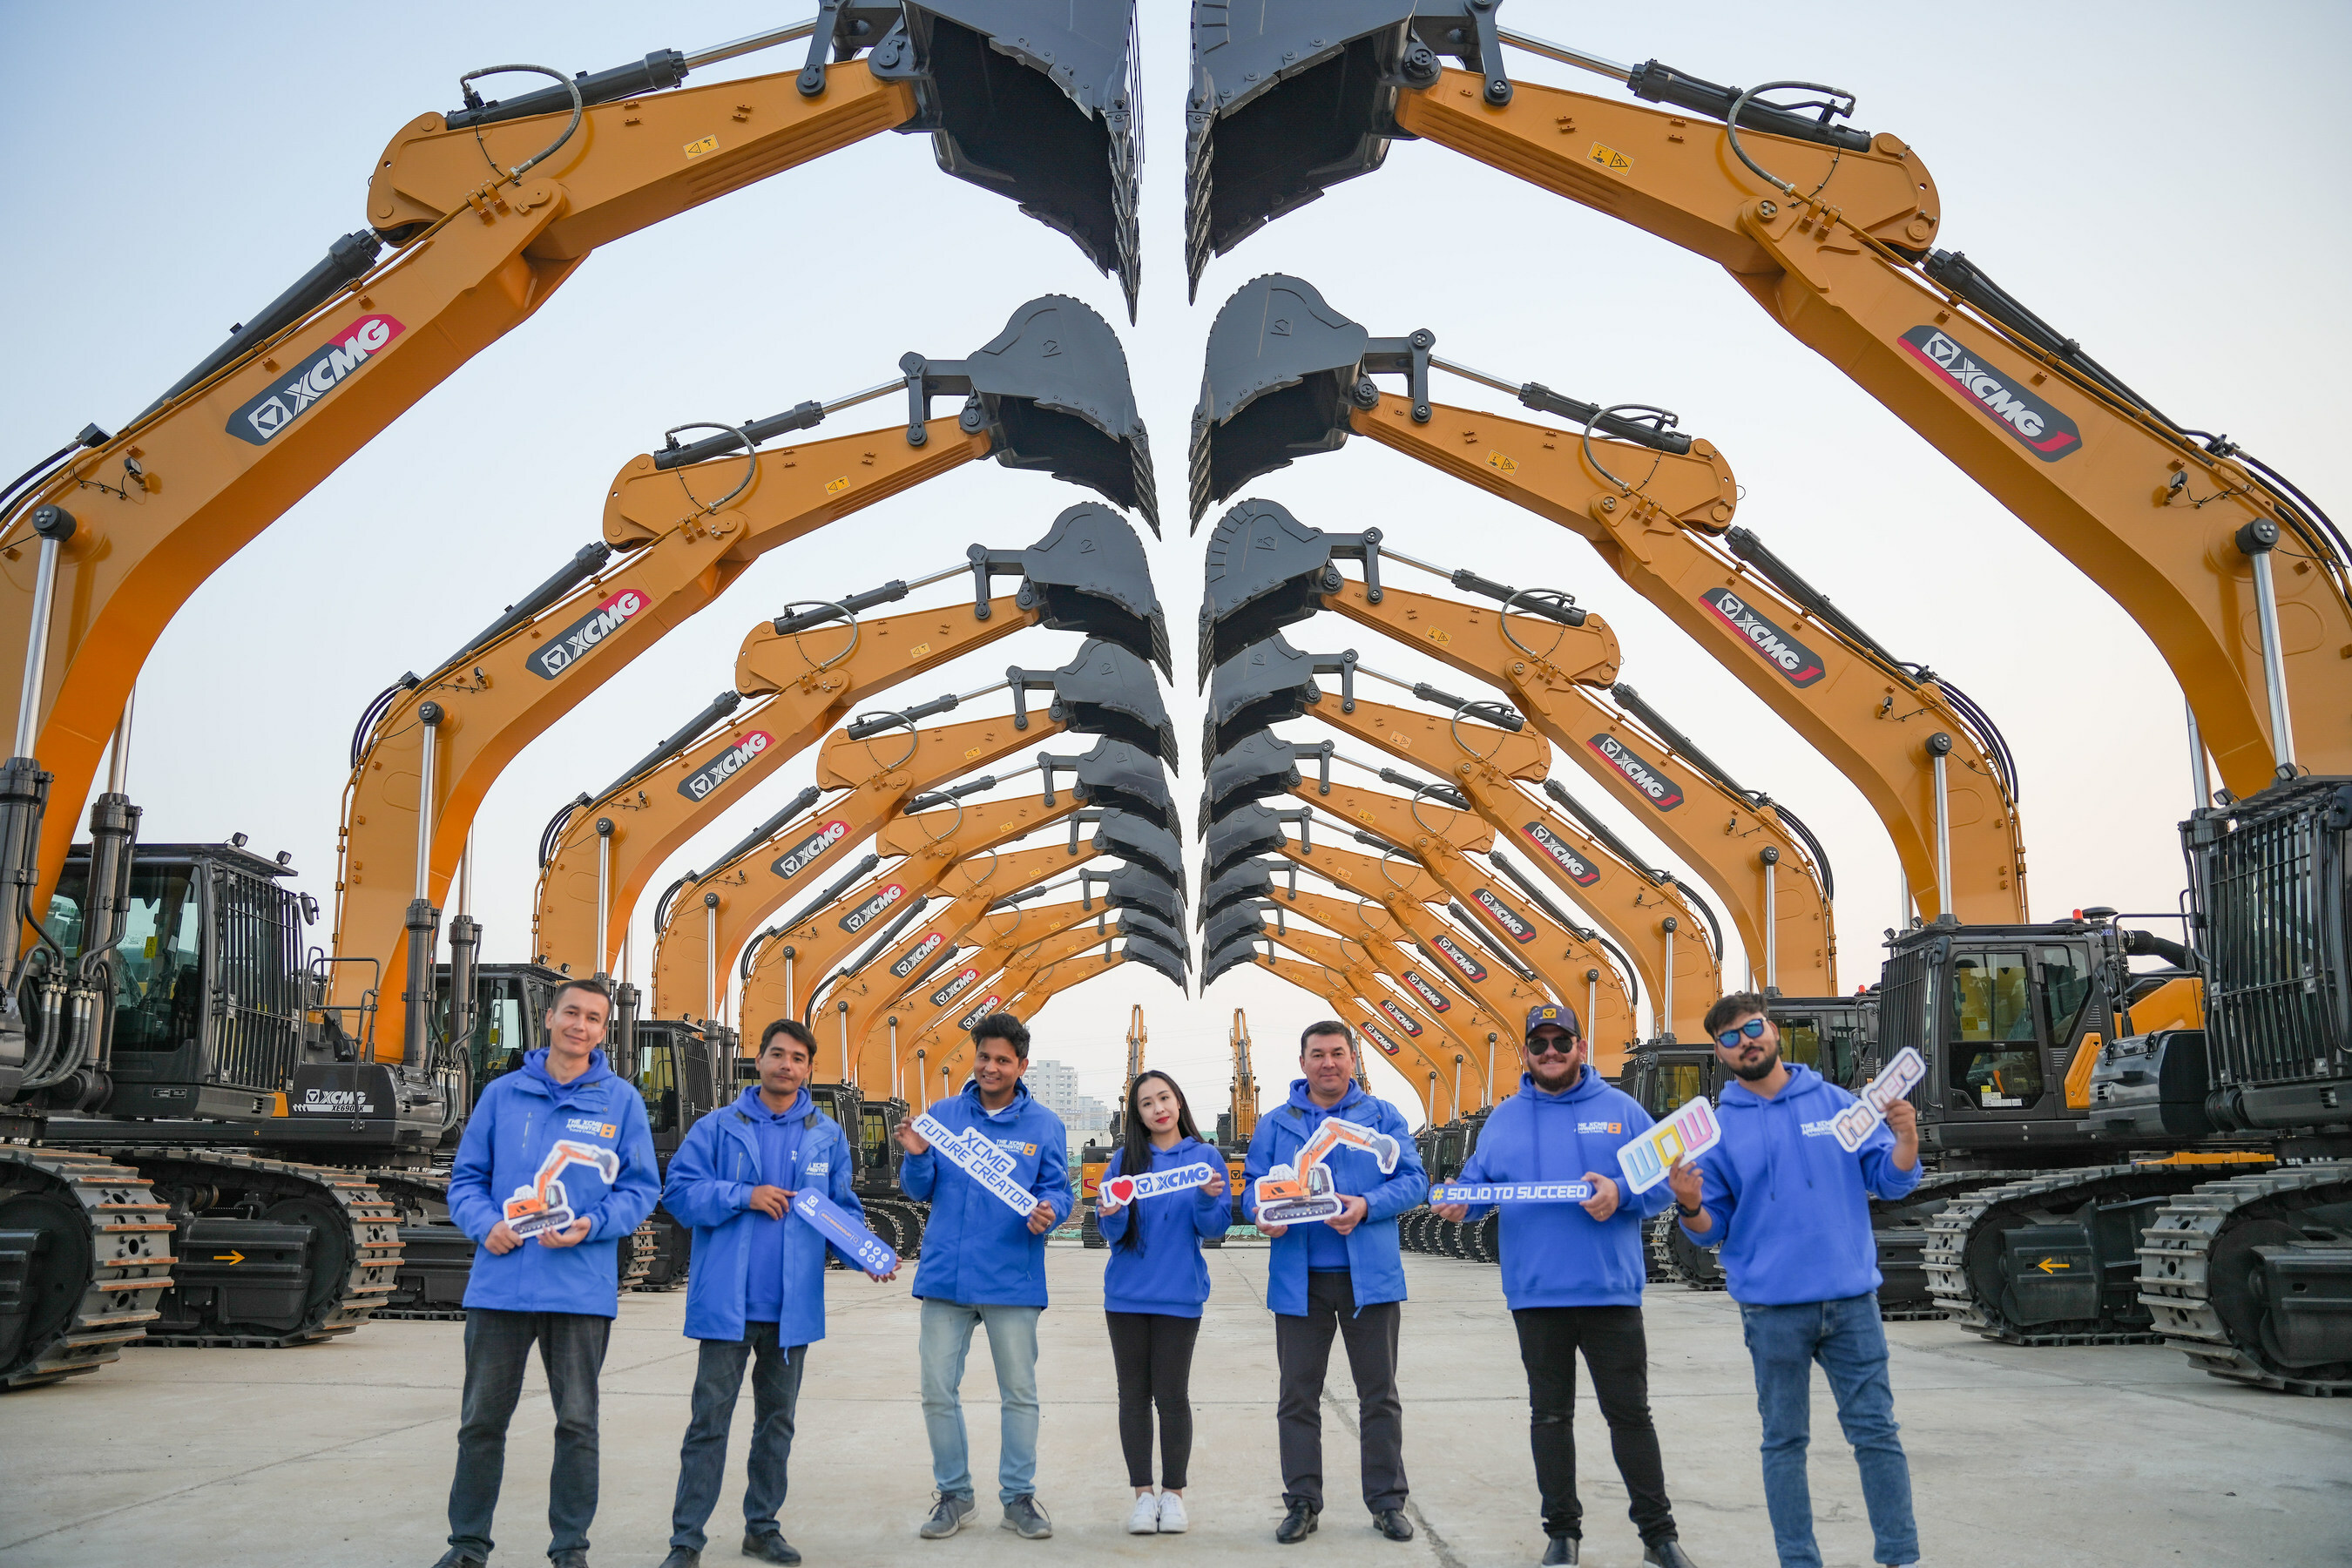 XCMG Excavator Showcases Commitment to High-Value Services and Intelligent Manufacturing at Apprentice Experience Day